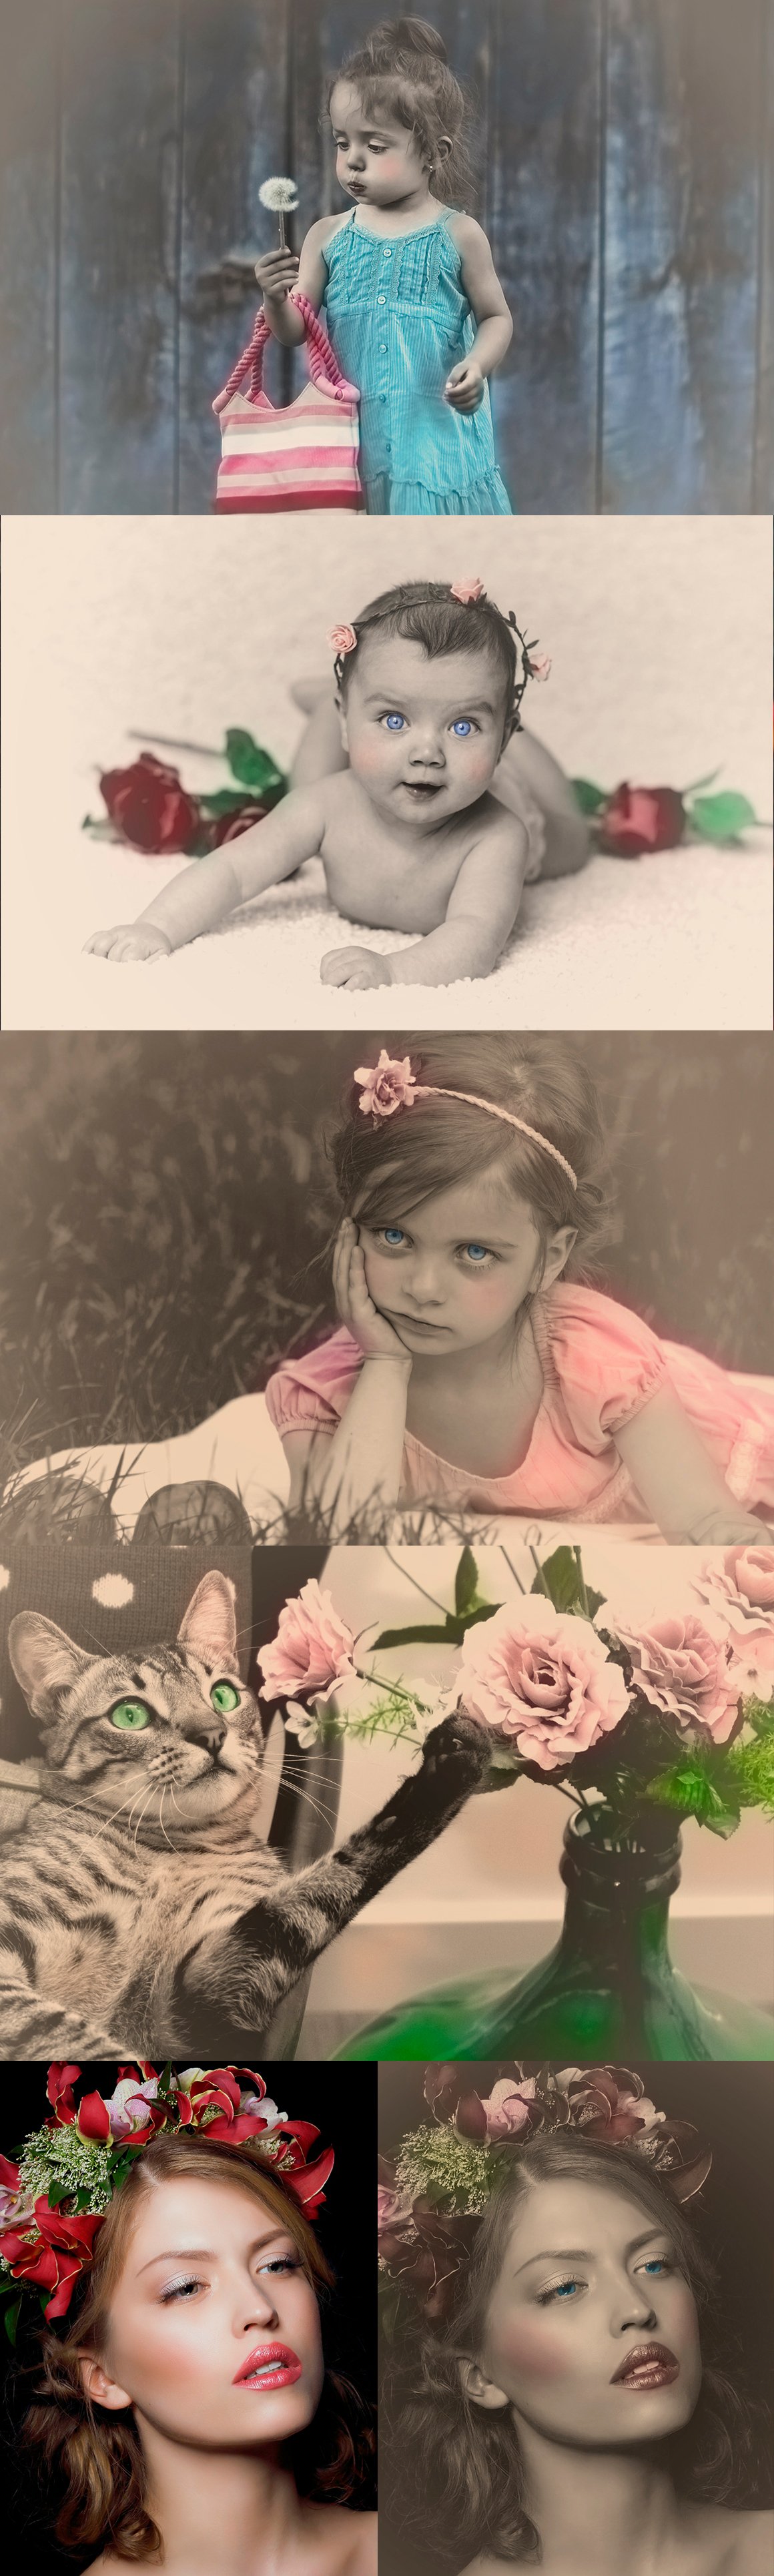 Colorized Old Photo Effects For Photoshop